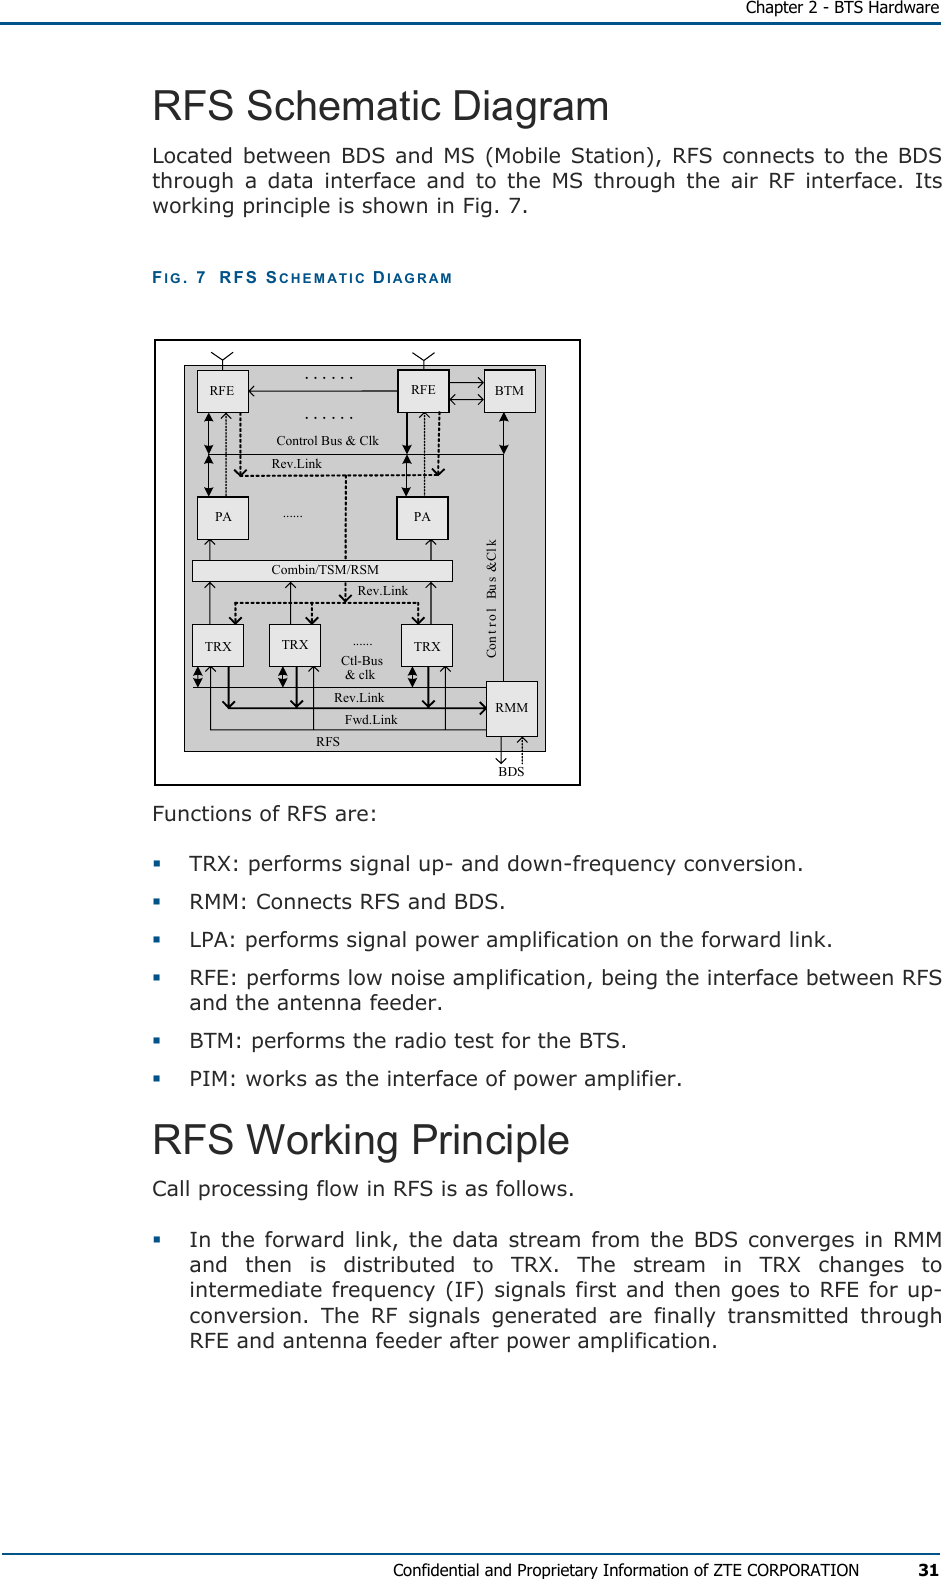   Chapter 2 - BTS Hardware Confidential and Proprietary Information of ZTE CORPORATION 31 RFS Schematic Diagram Located between BDS and MS (Mobile Station), RFS connects to the BDS through a data interface and to the MS through the air RF interface. Its working principle is shown in Fig. 7. FIG. 7  RFS SCHEMATIC DIAGRAM Ctl-Bus &amp; clkRev.LinkFwd.Link............Rev.LinkRev.Link......Co n t r o l Bu s &amp; C l kRFS......Control Bus &amp; ClkBDSRFE RFEPA PABTMCombin/TSM/RSMTRX TRX TRXRMM Functions of RFS are:   TRX: performs signal up- and down-frequency conversion.   RMM: Connects RFS and BDS.    LPA: performs signal power amplification on the forward link.    RFE: performs low noise amplification, being the interface between RFS and the antenna feeder.   BTM: performs the radio test for the BTS.   PIM: works as the interface of power amplifier. RFS Working Principle Call processing flow in RFS is as follows.   In the forward link, the data stream from the BDS converges in RMM and then is distributed to TRX. The stream in TRX changes to intermediate frequency (IF) signals first and then goes to RFE for up-conversion. The RF signals generated are finally transmitted through RFE and antenna feeder after power amplification.  